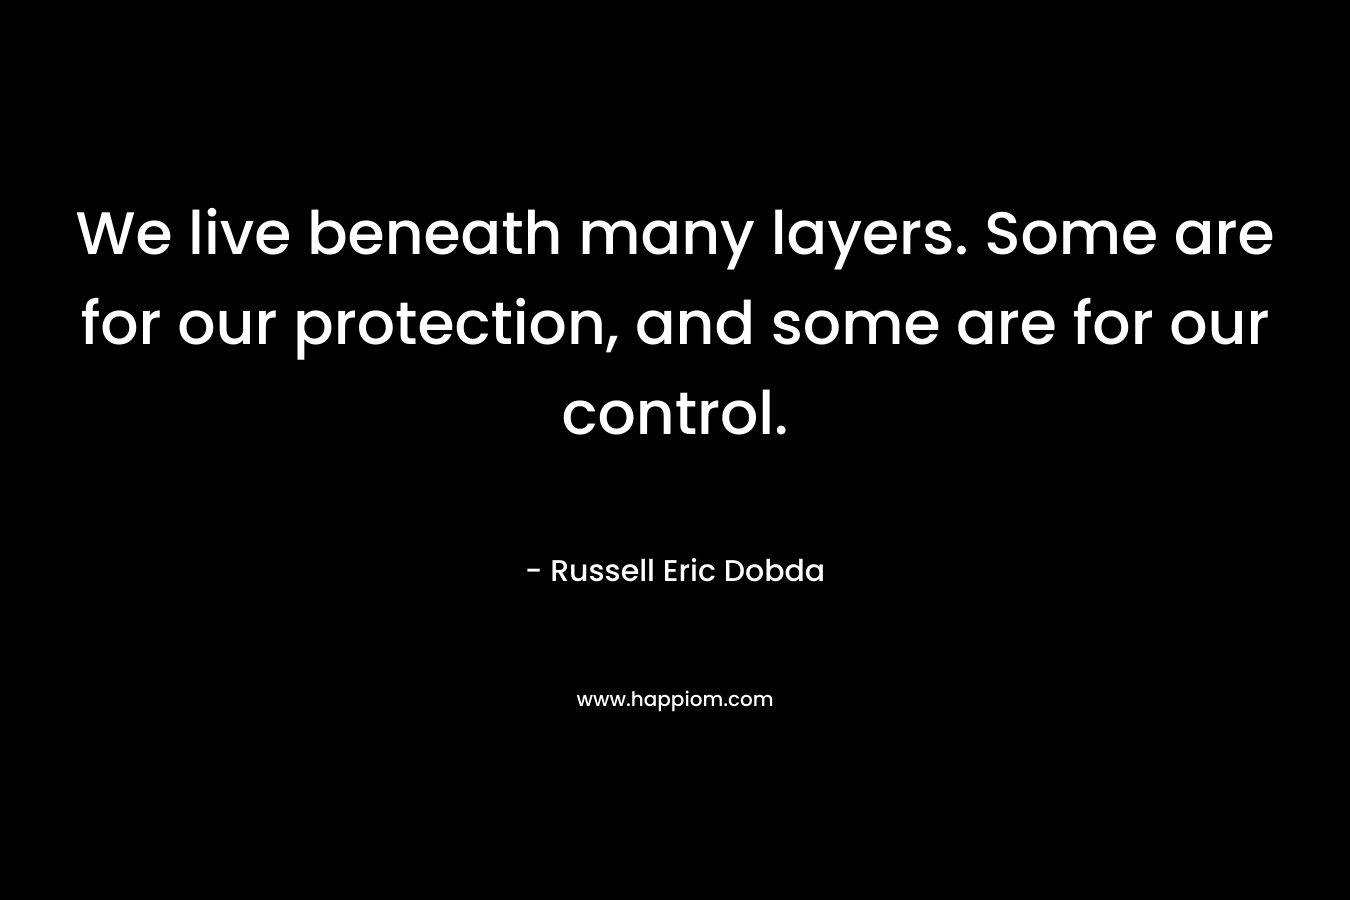 We live beneath many layers. Some are for our protection, and some are for our control. – Russell Eric Dobda